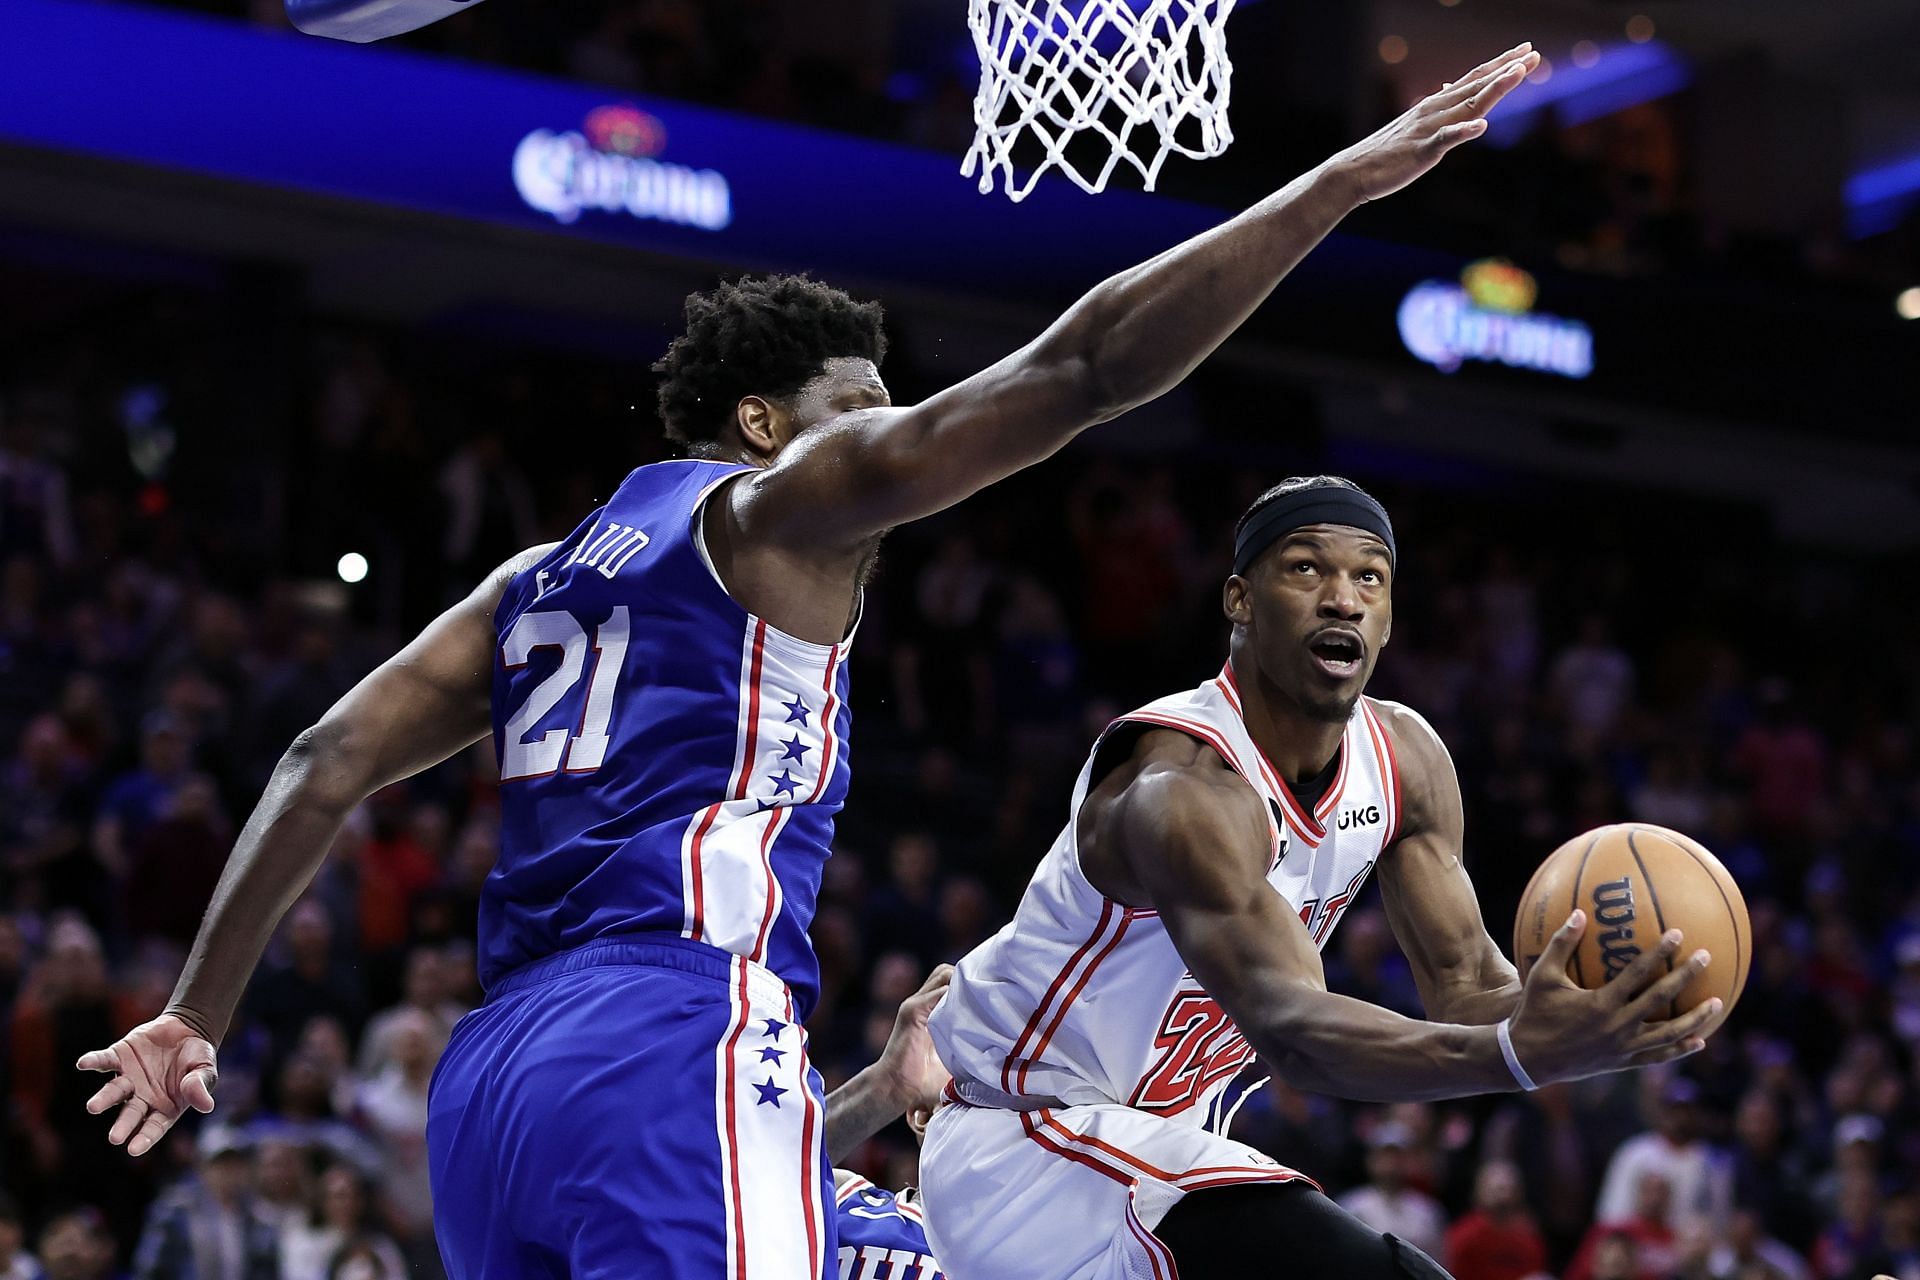 Joel Embiid and Jimmy Butler could end up facing each other in the Eastern Conference finals.